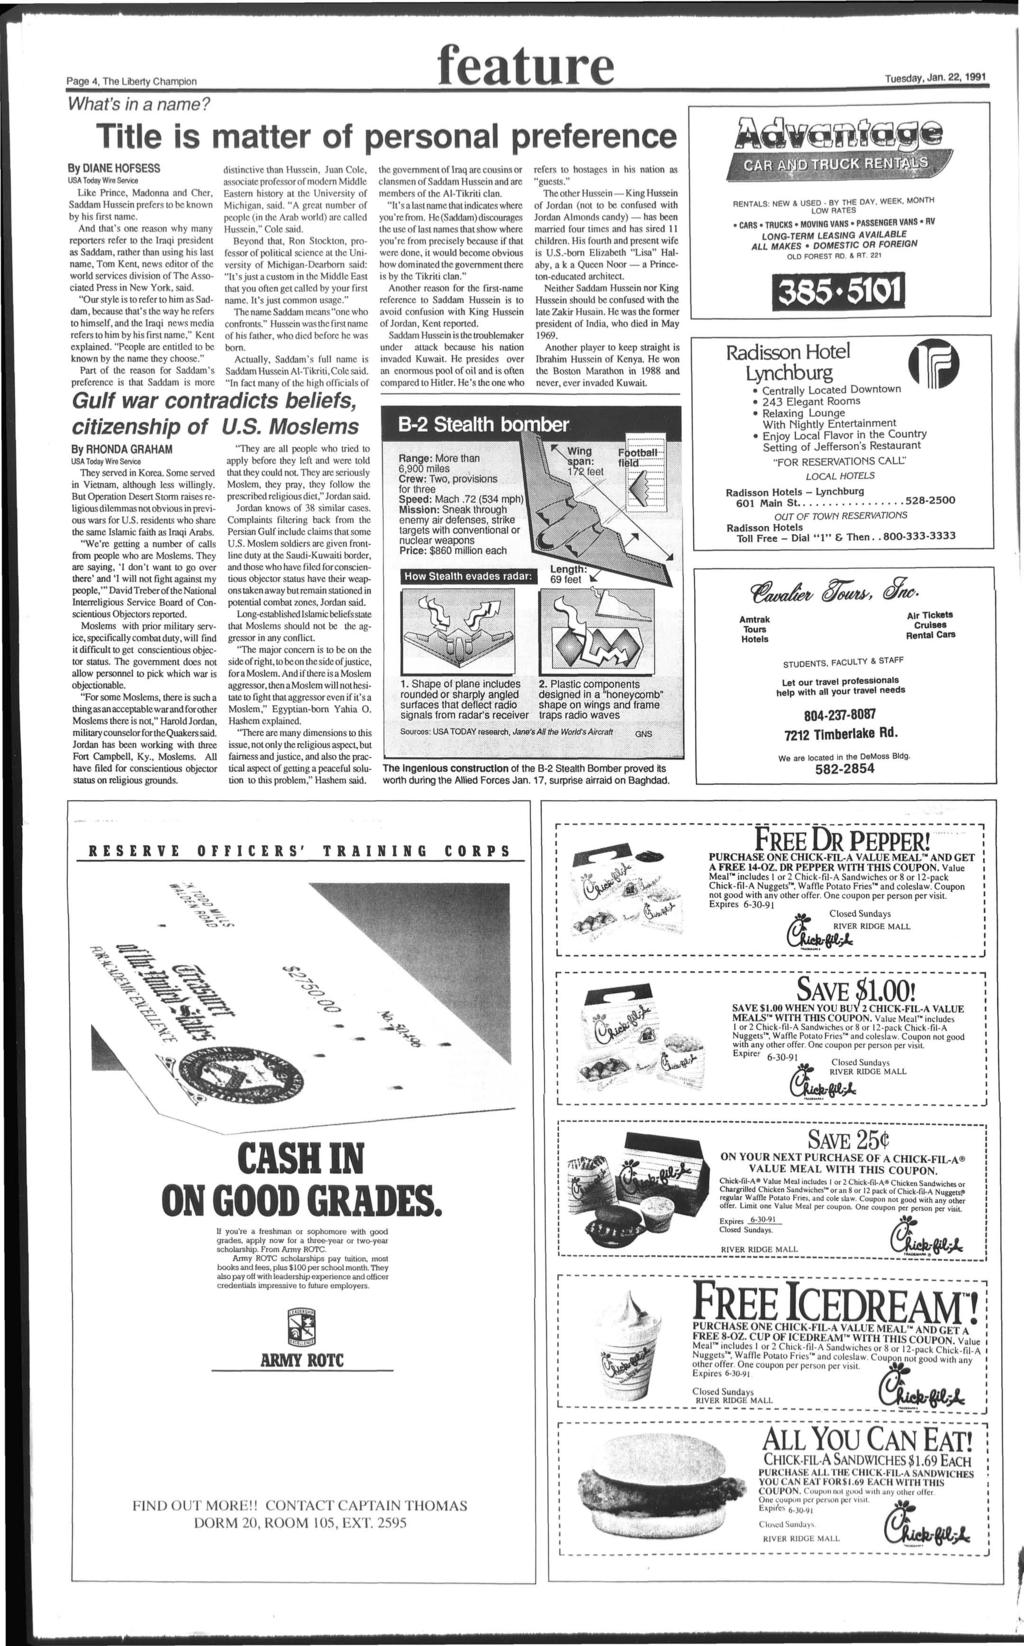 Page 4, The Lberty Champon feature What's n a name?